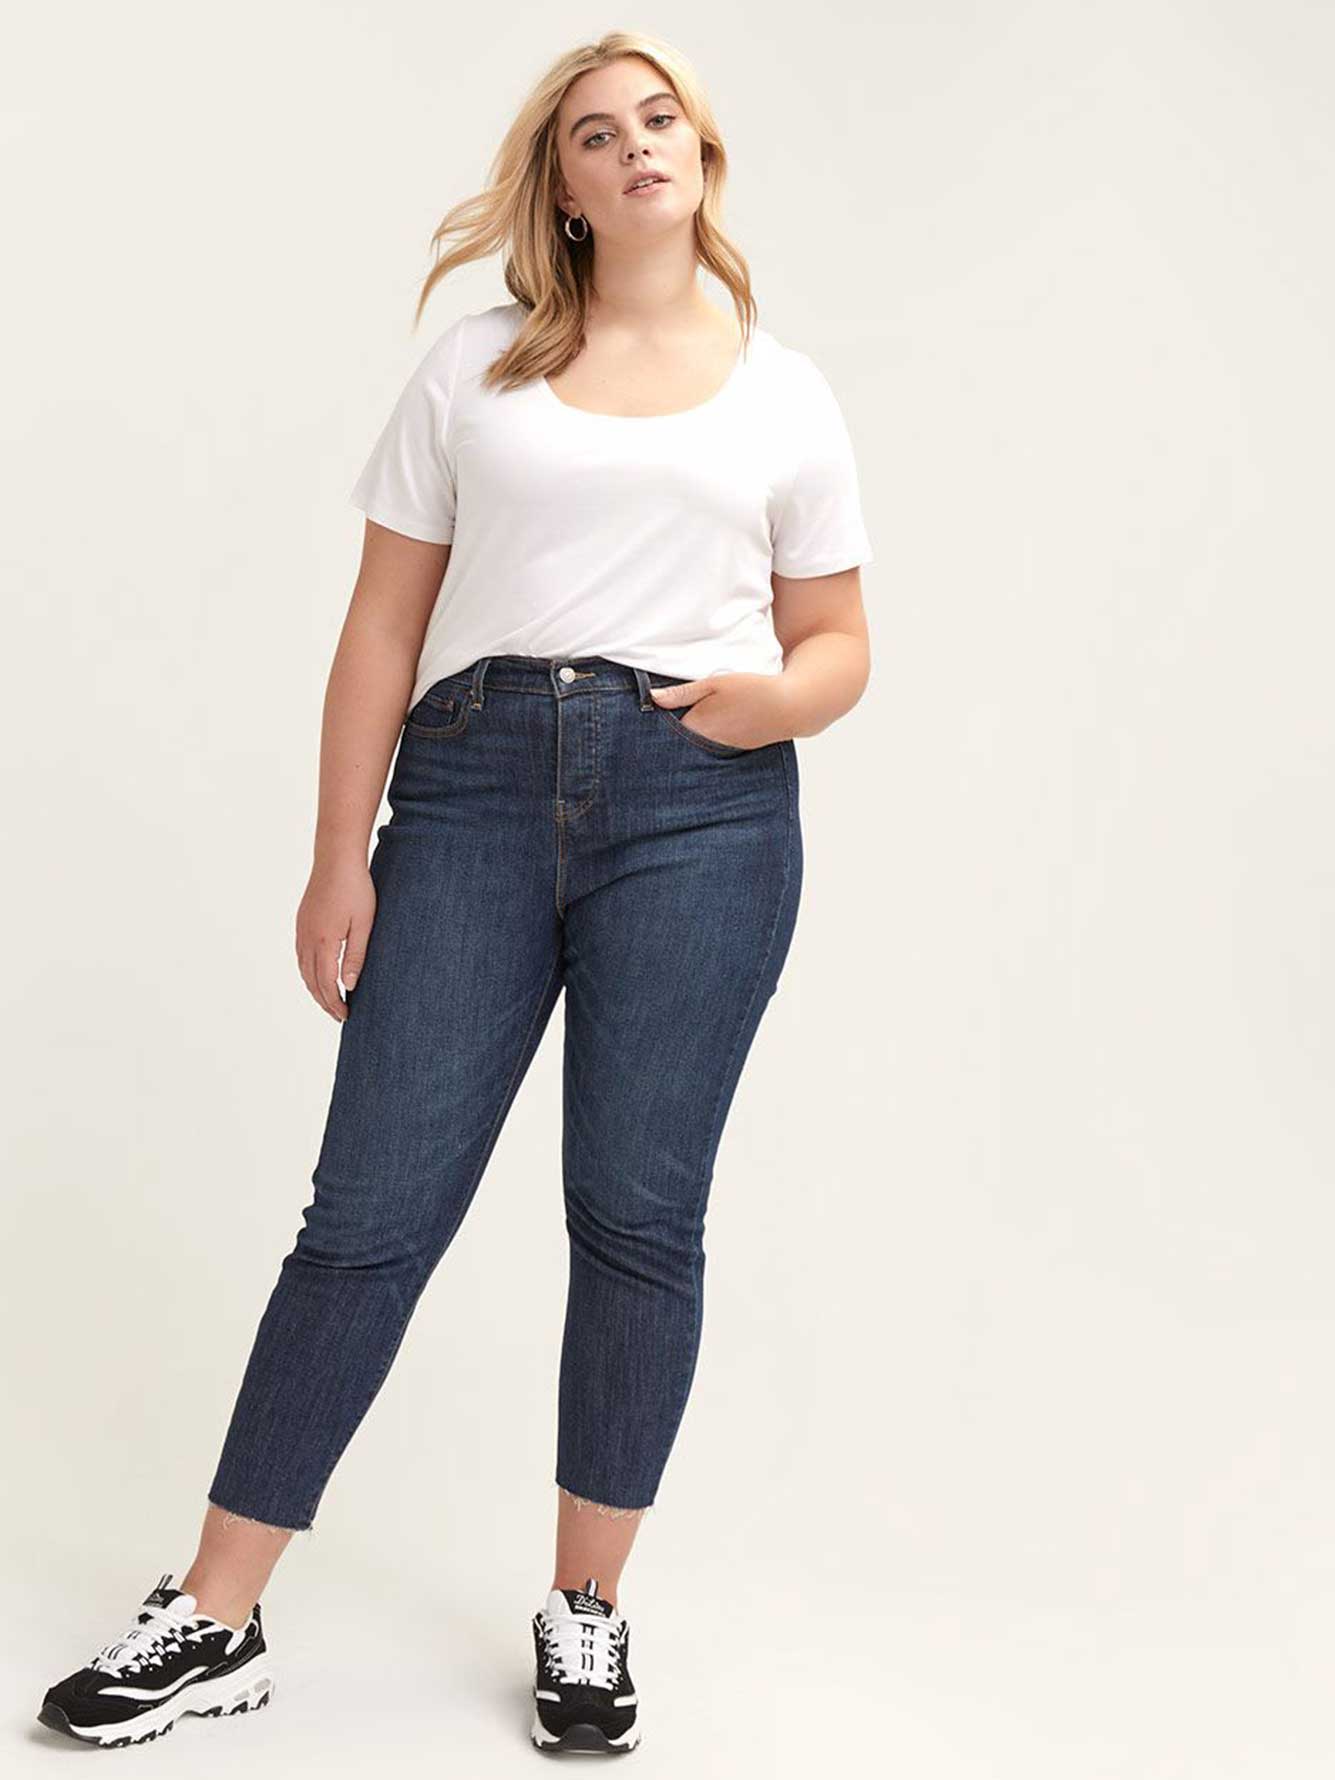 Wedgie From the Block Stretchy Skinny Jean - Levi's | Penningtons